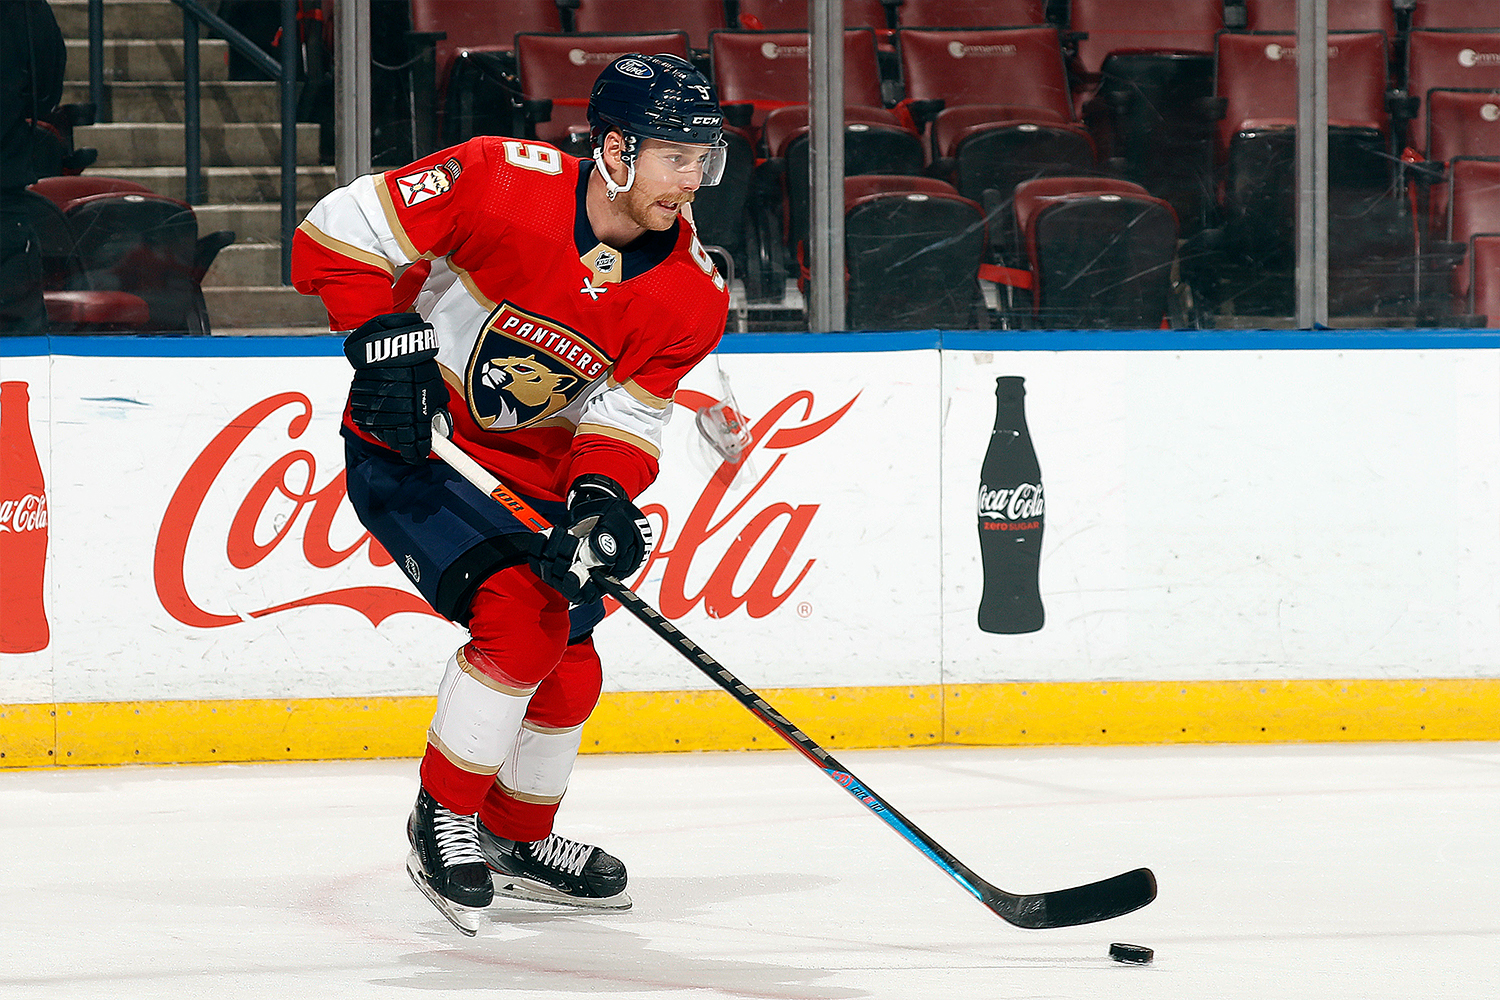 Sam Bennett #9 of the Florida Panthers warms up on the ice prior to the start of the game against the Carolina Hurricanes at the BB&T Center on April 22